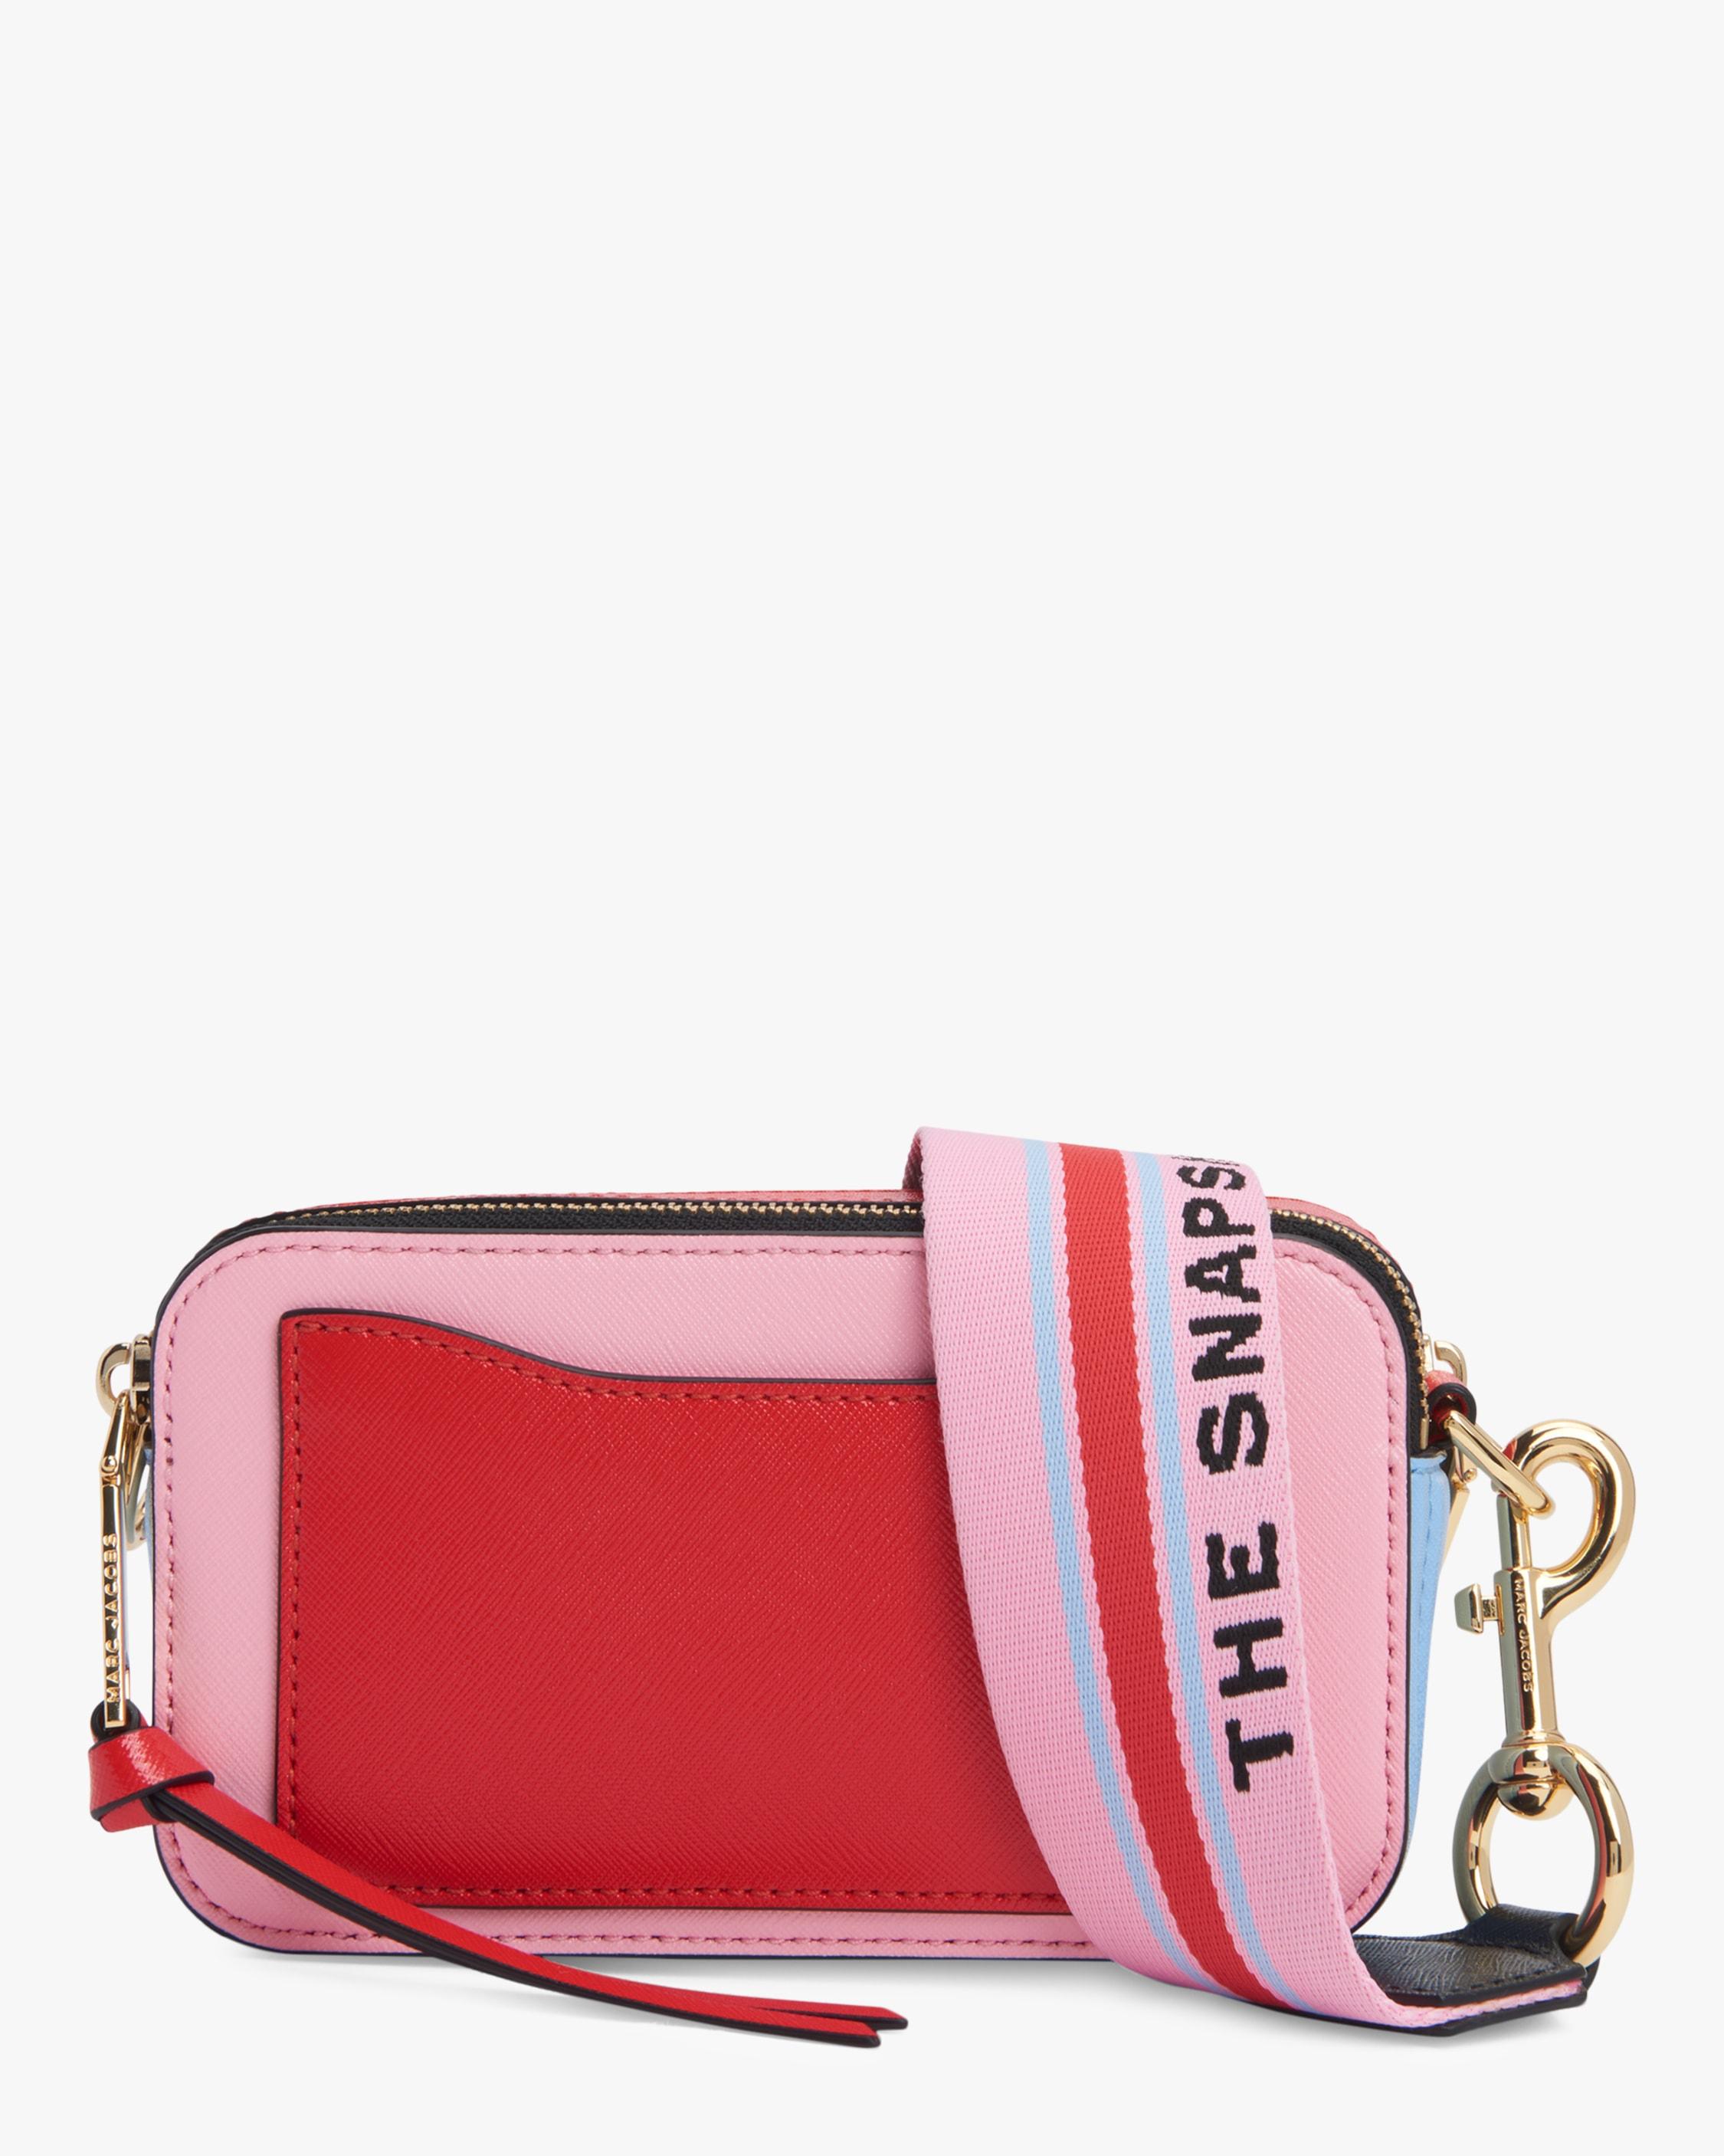 Marc Jacobs The Snapshot Camera Bag in Pink - Lyst